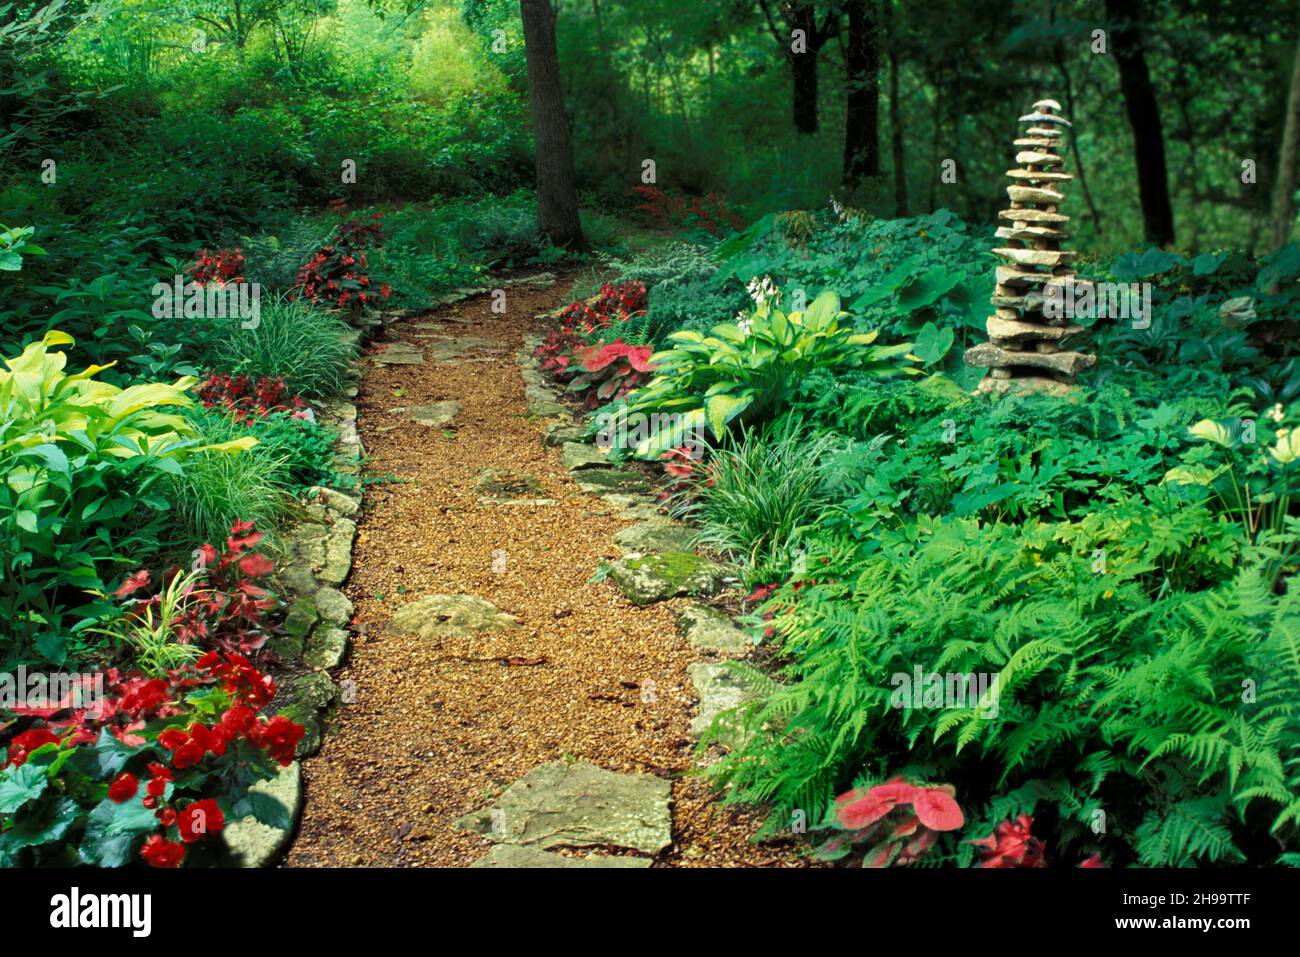 Beautiful hand made rock cairn stands in a lush shade garden with a gravel walkway through ferns and blooming flowers, Missouri, USA Stock Photo